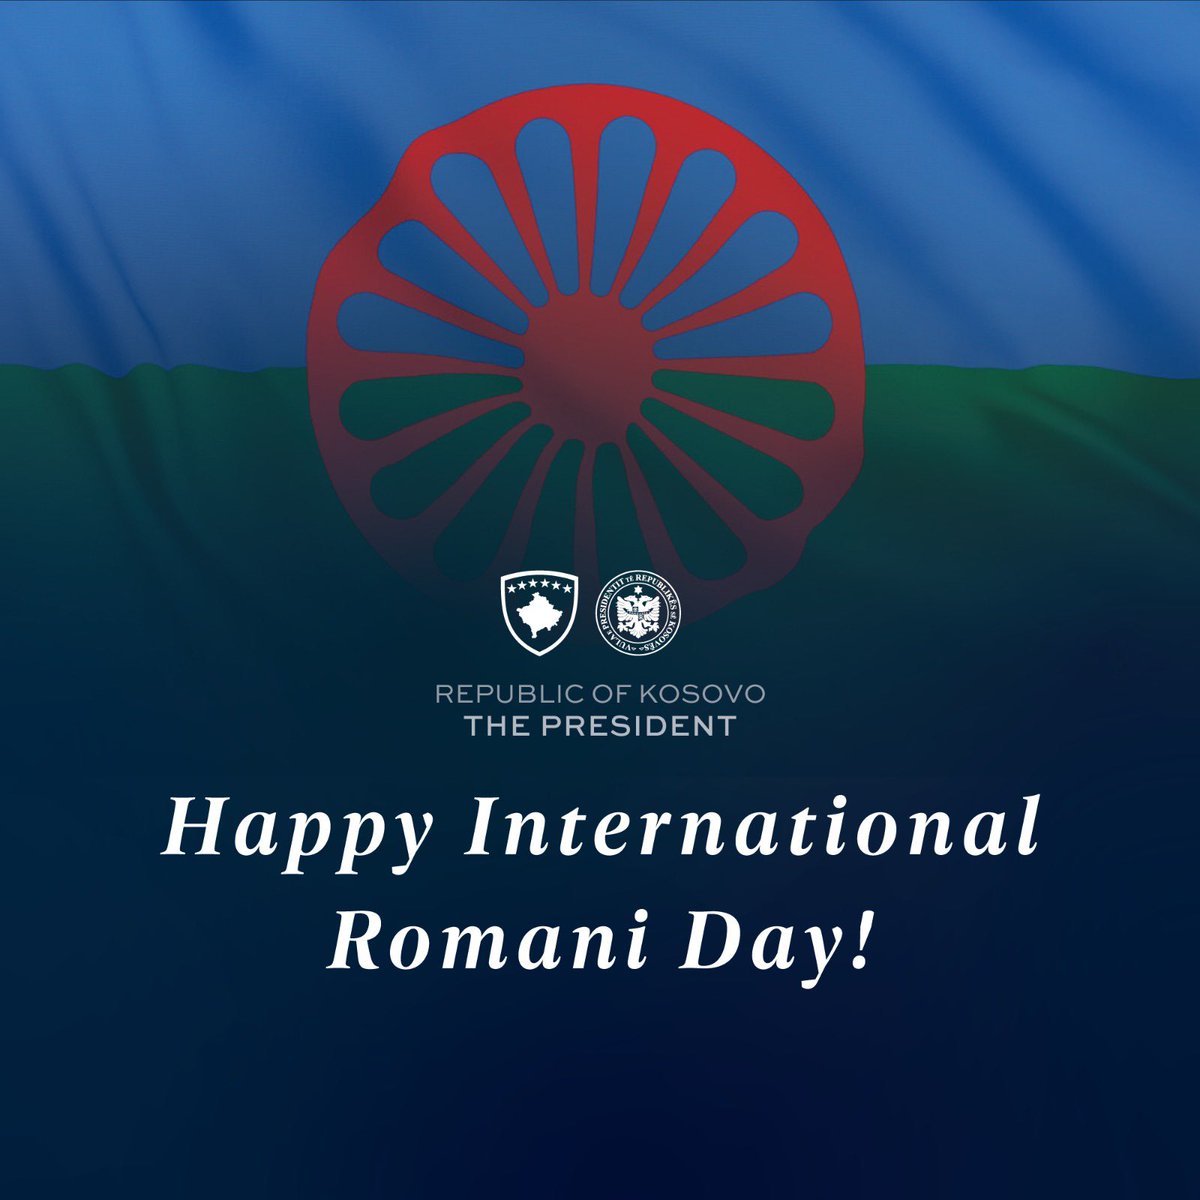 On #InternationalRomaniDay, we celebrate the rich culture, history and achievements of our Roma community and we recognize their continuous contributions to 🇽🇰. 

Today, we also reflect on the work that needs to be done to continue advancing equality & inclusion for all.